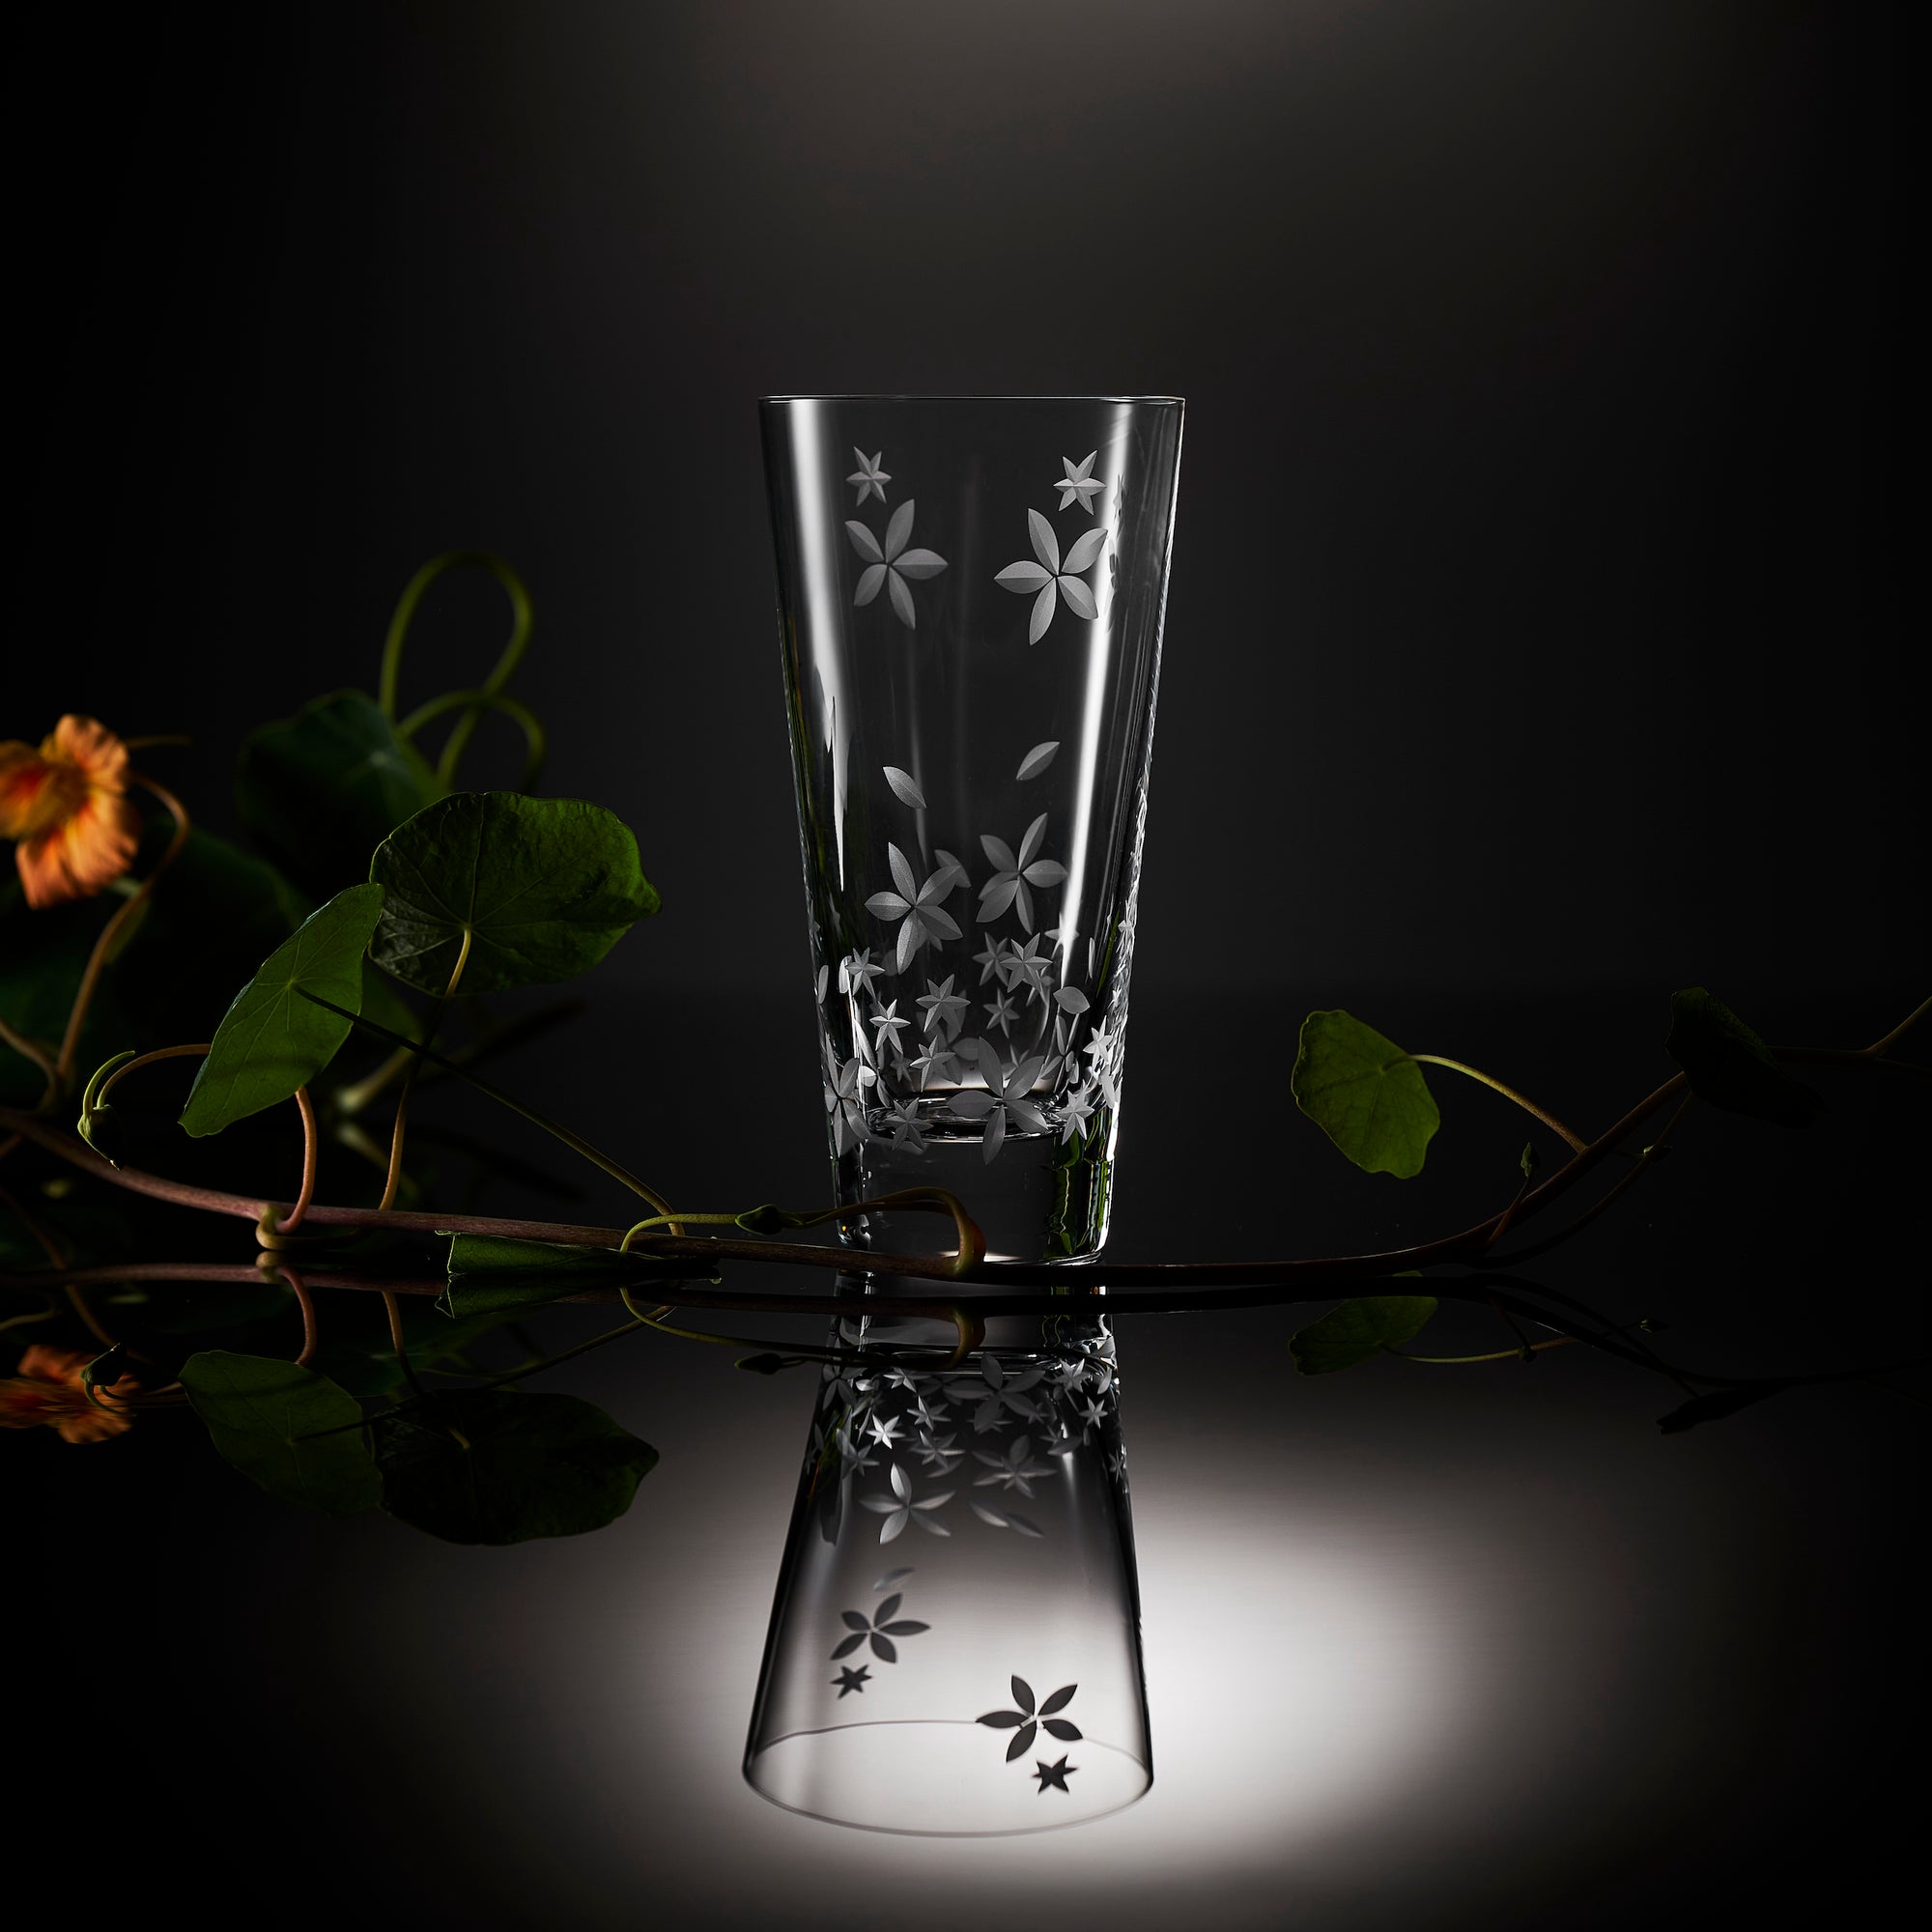 Chatham Bloom highball glasses, etched floral pattern on lead-free crystal by Caskata.